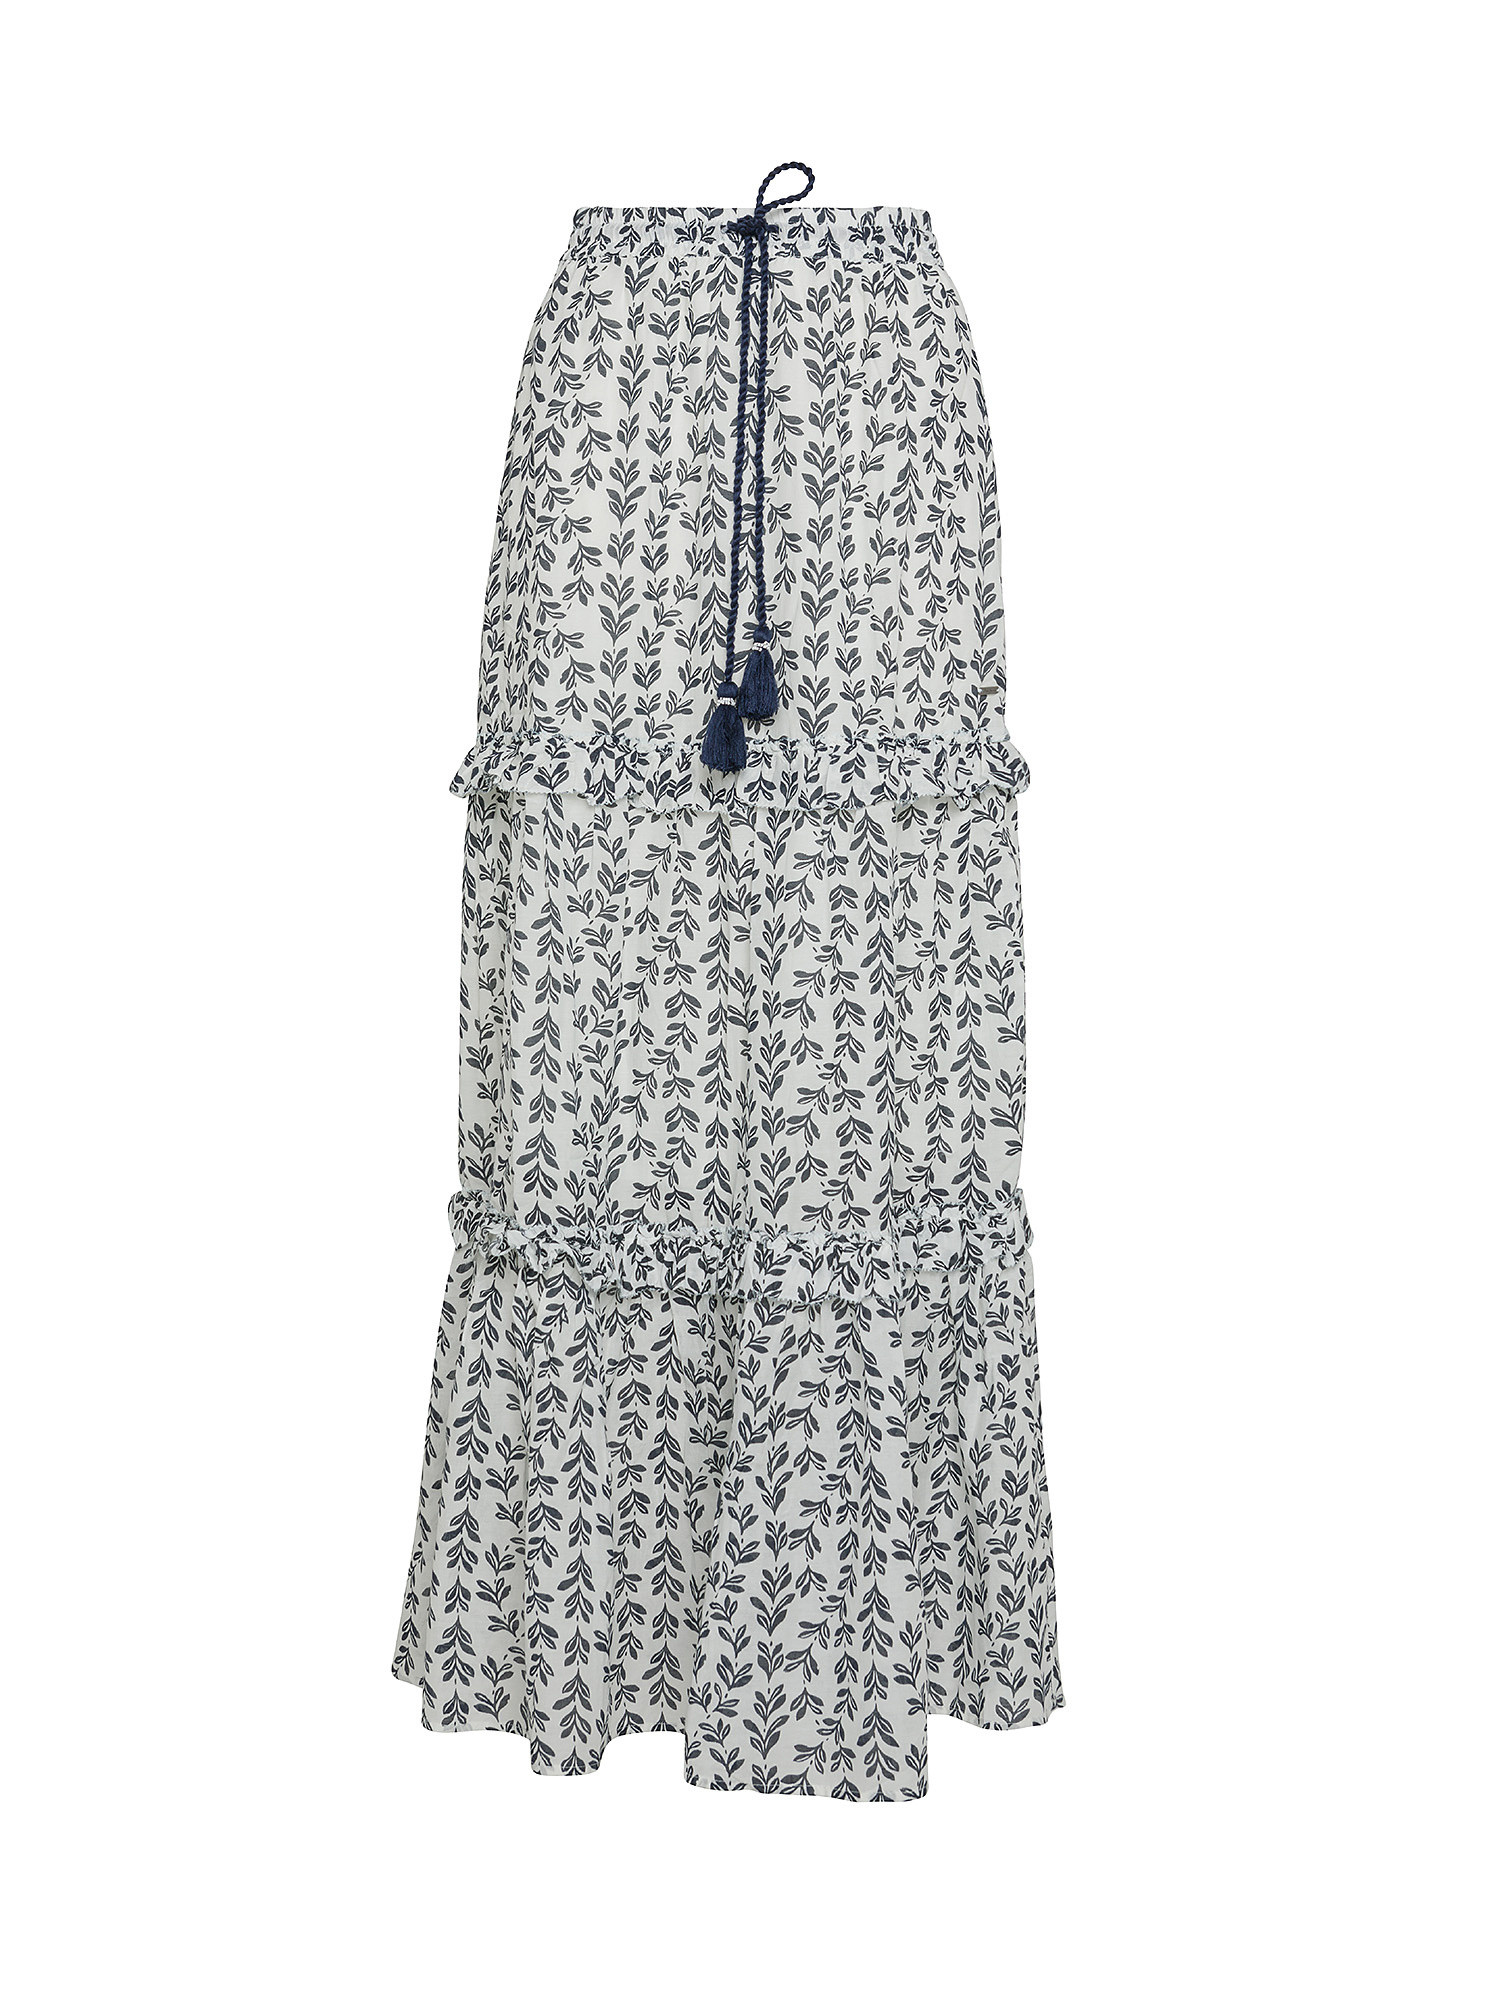 Pepe Jeans - Patterned skirt, White, large image number 0